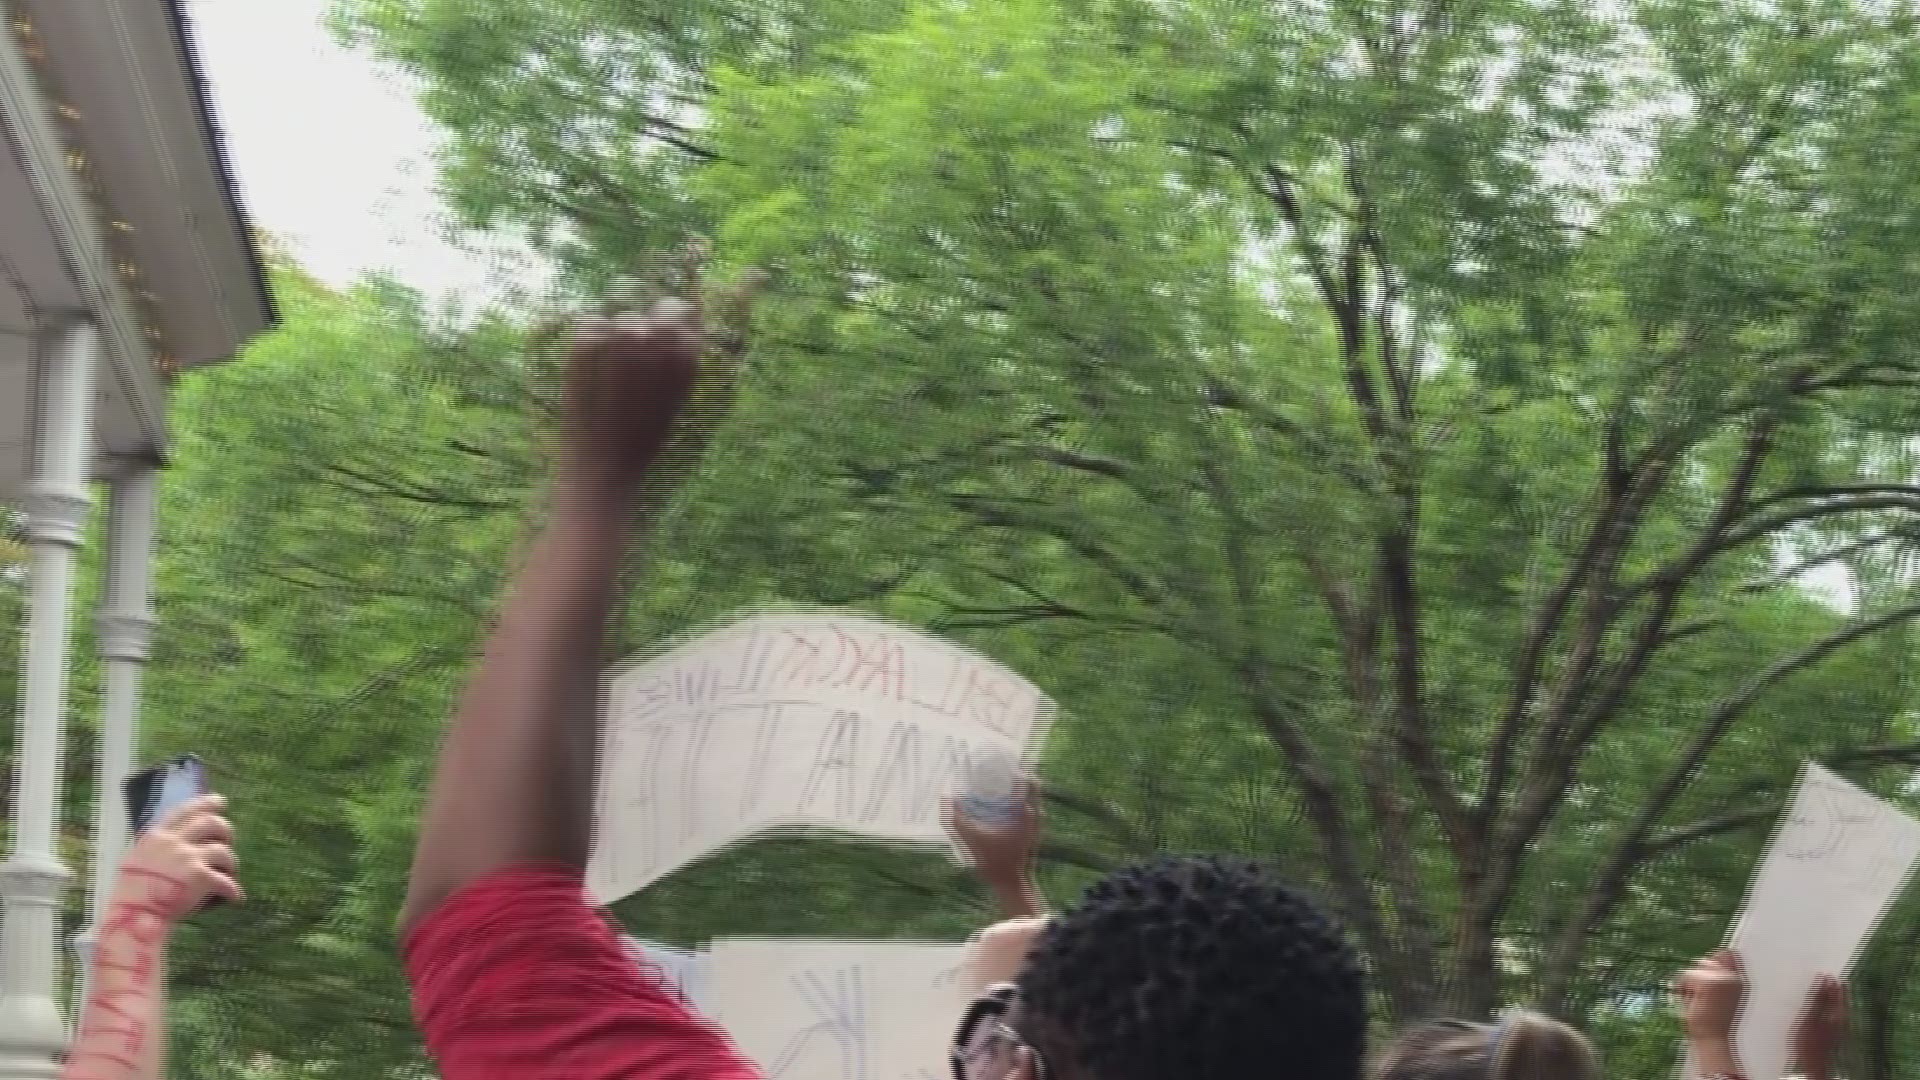 Protesters worked with police in Marietta to lead a peaceful march through downtown.